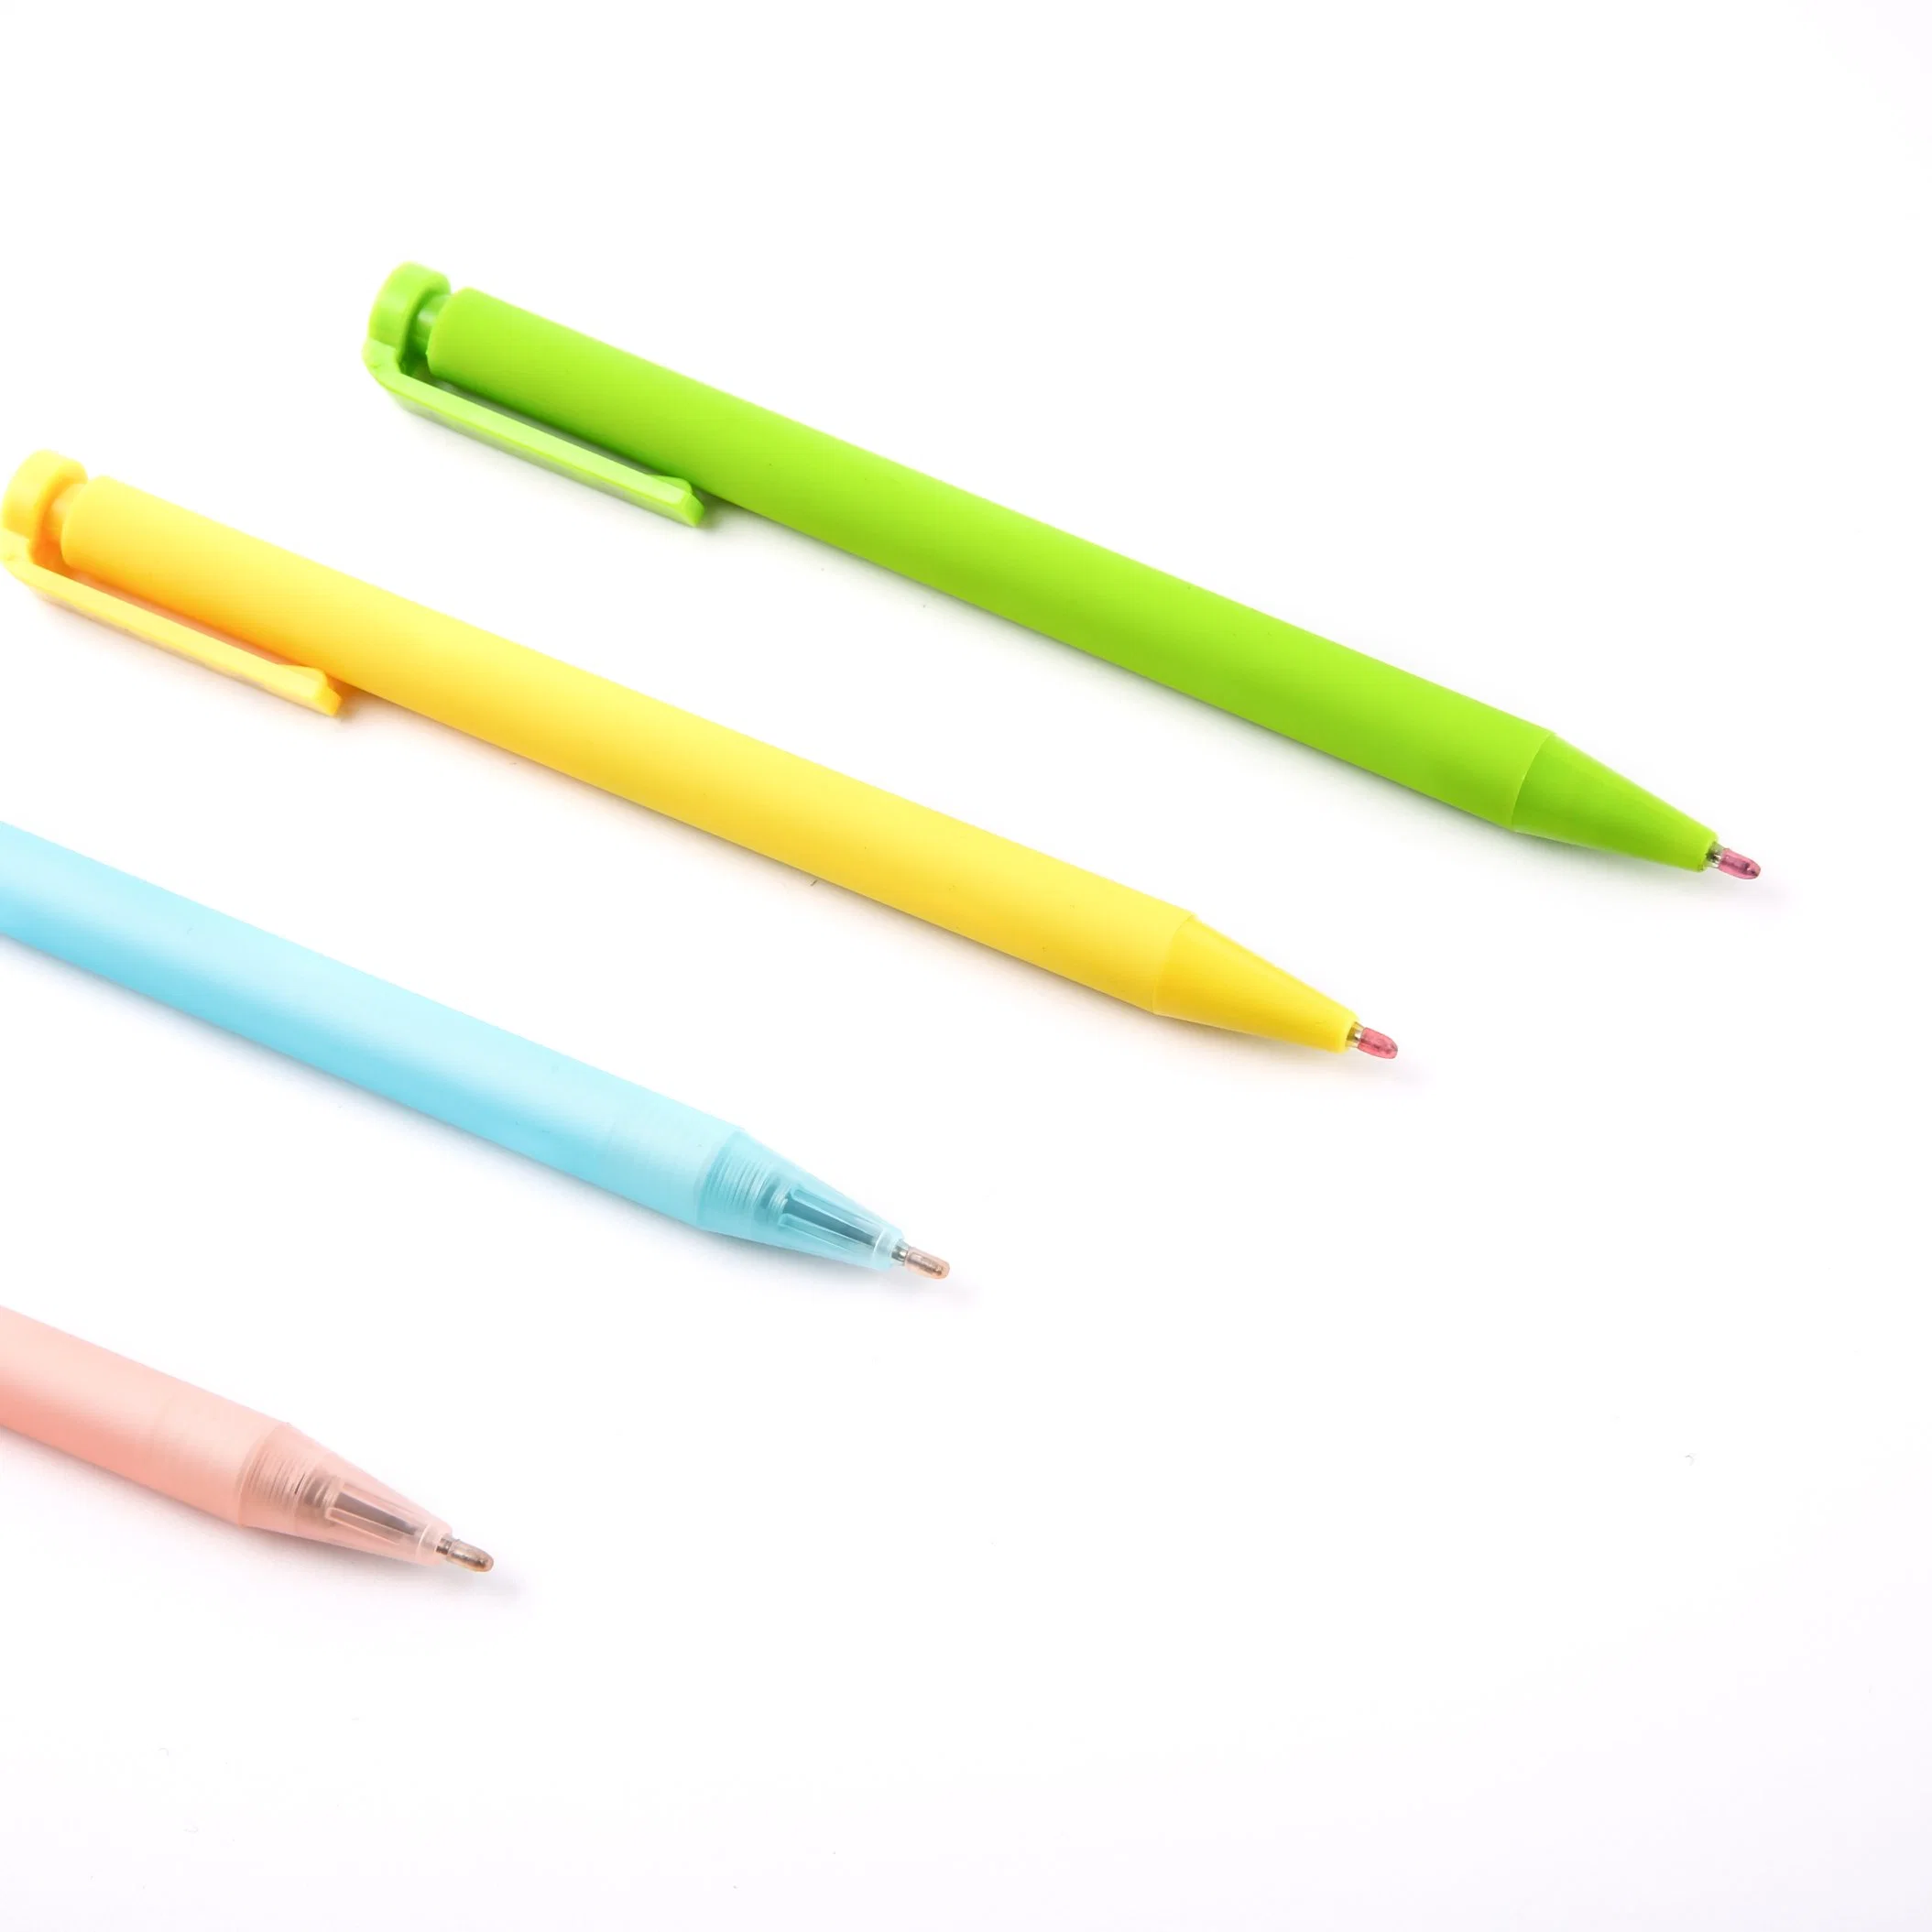 Manufactory OEM Ball Point Pen for Office and School Use 0.5mm 0.7mm